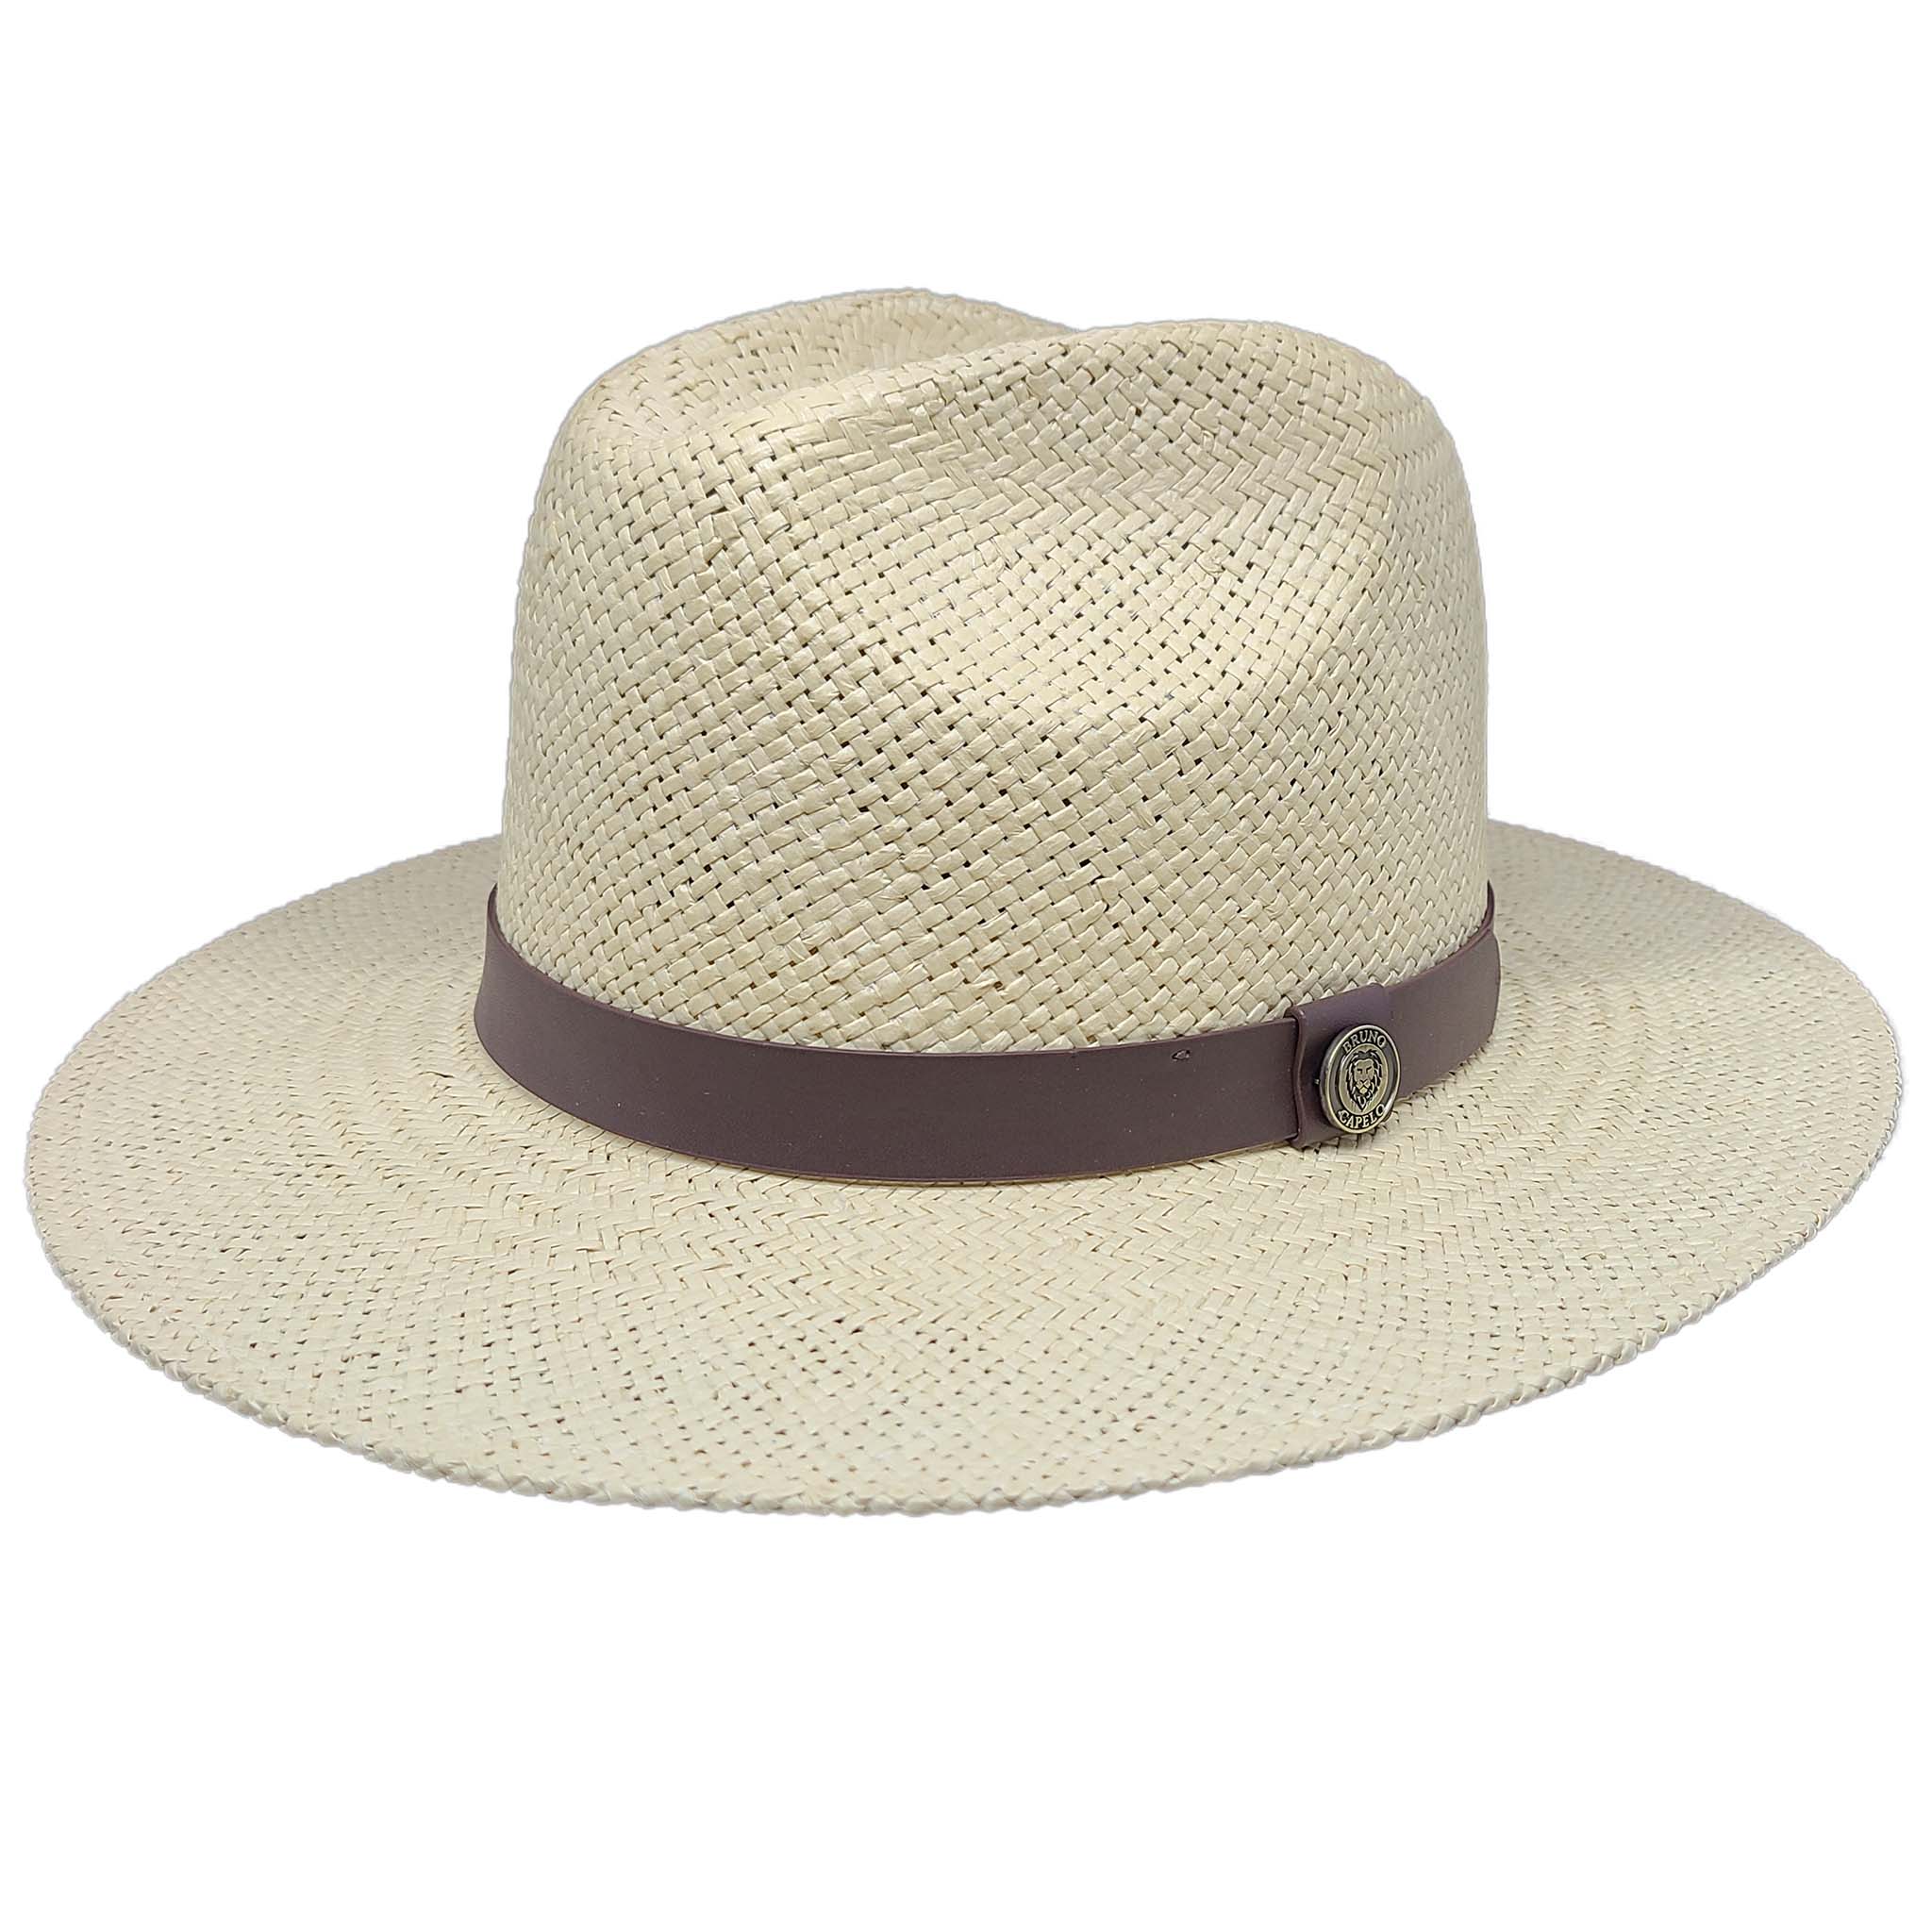 Natural Fedora Style Straw Hat - Front View